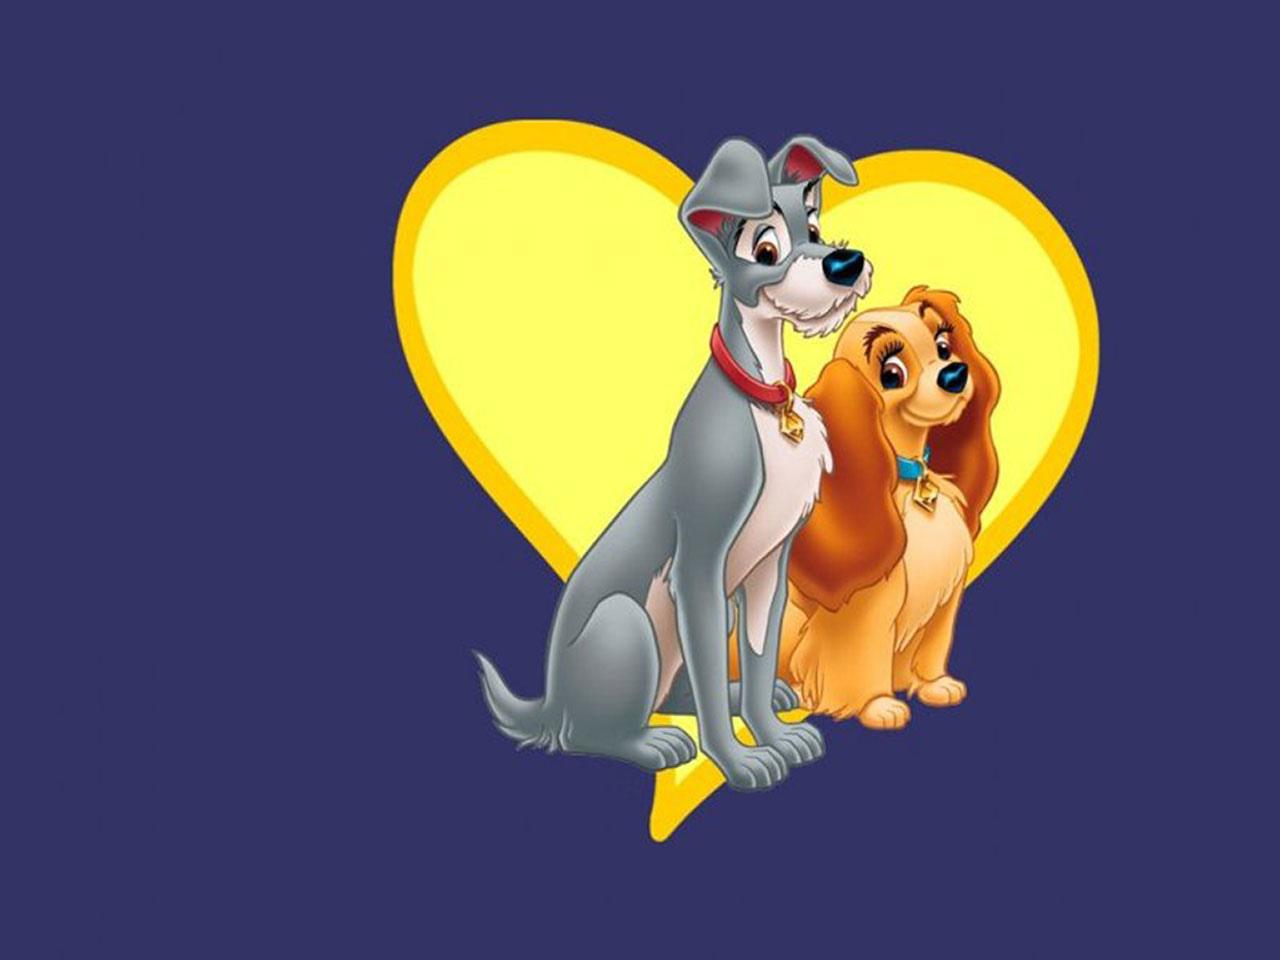 lady and the tramp wallpapers wallpaper cave on the lady and the tramp wallpapers